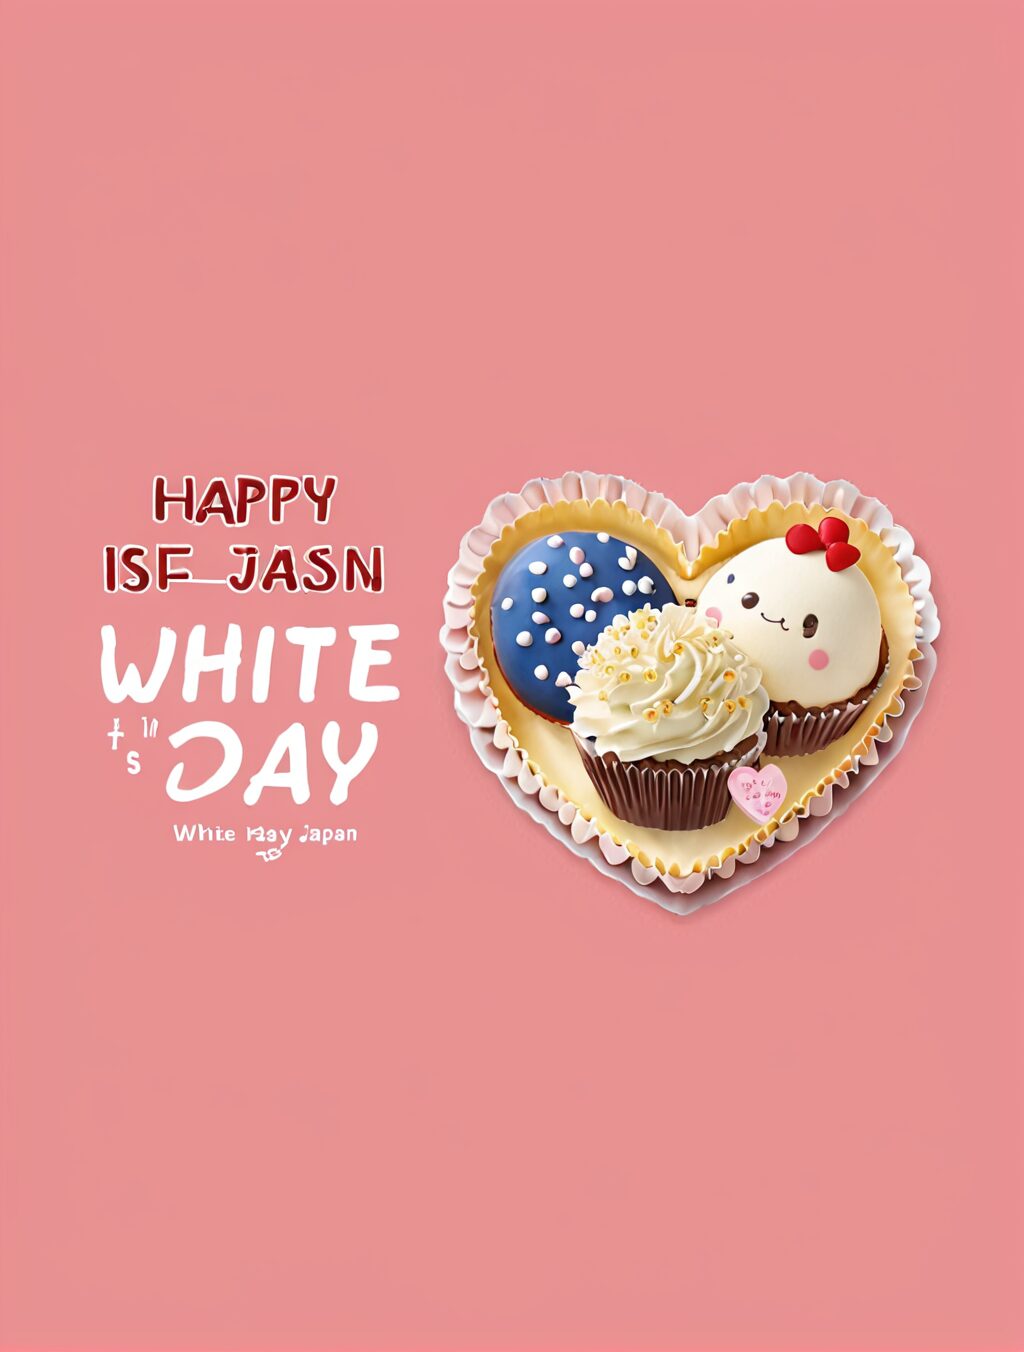 when is white day in japan